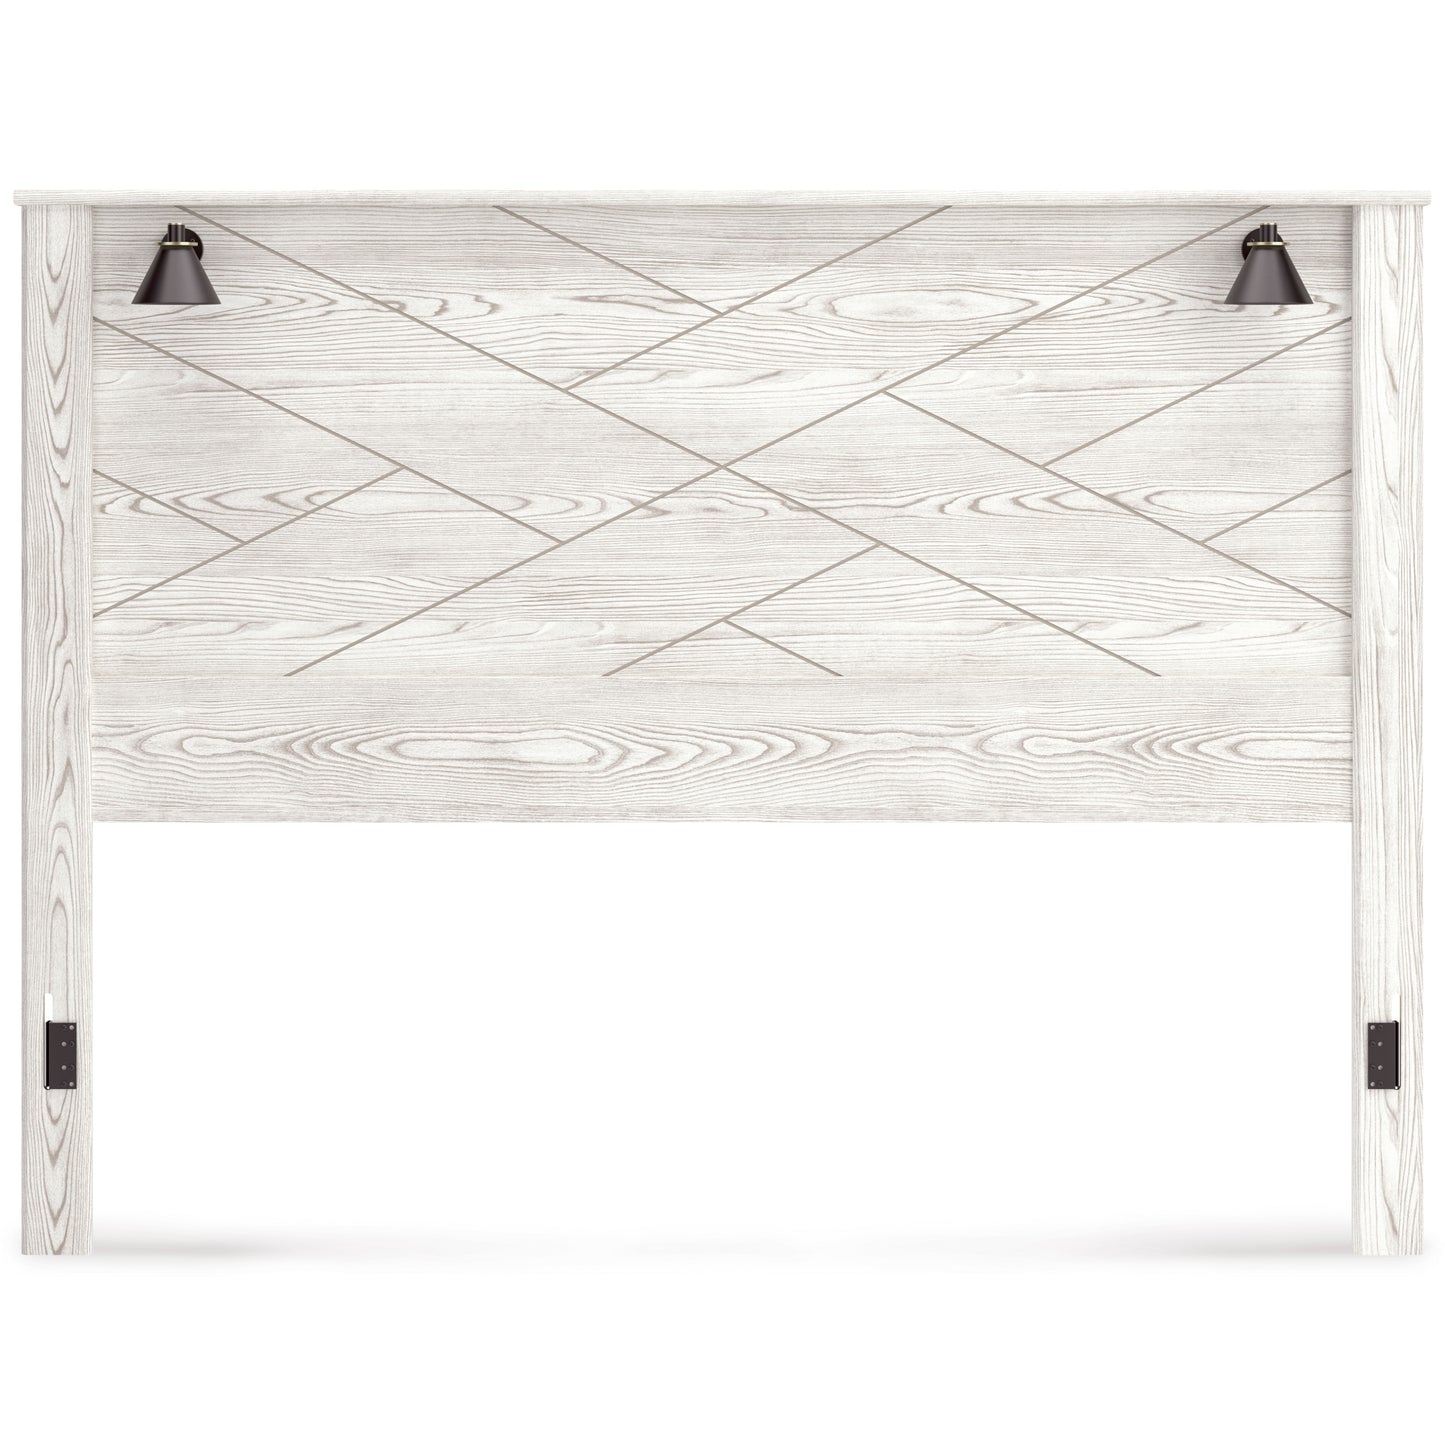 GERRIDAN PANEL BED WITH LIGHTS - WHITE/GRAY